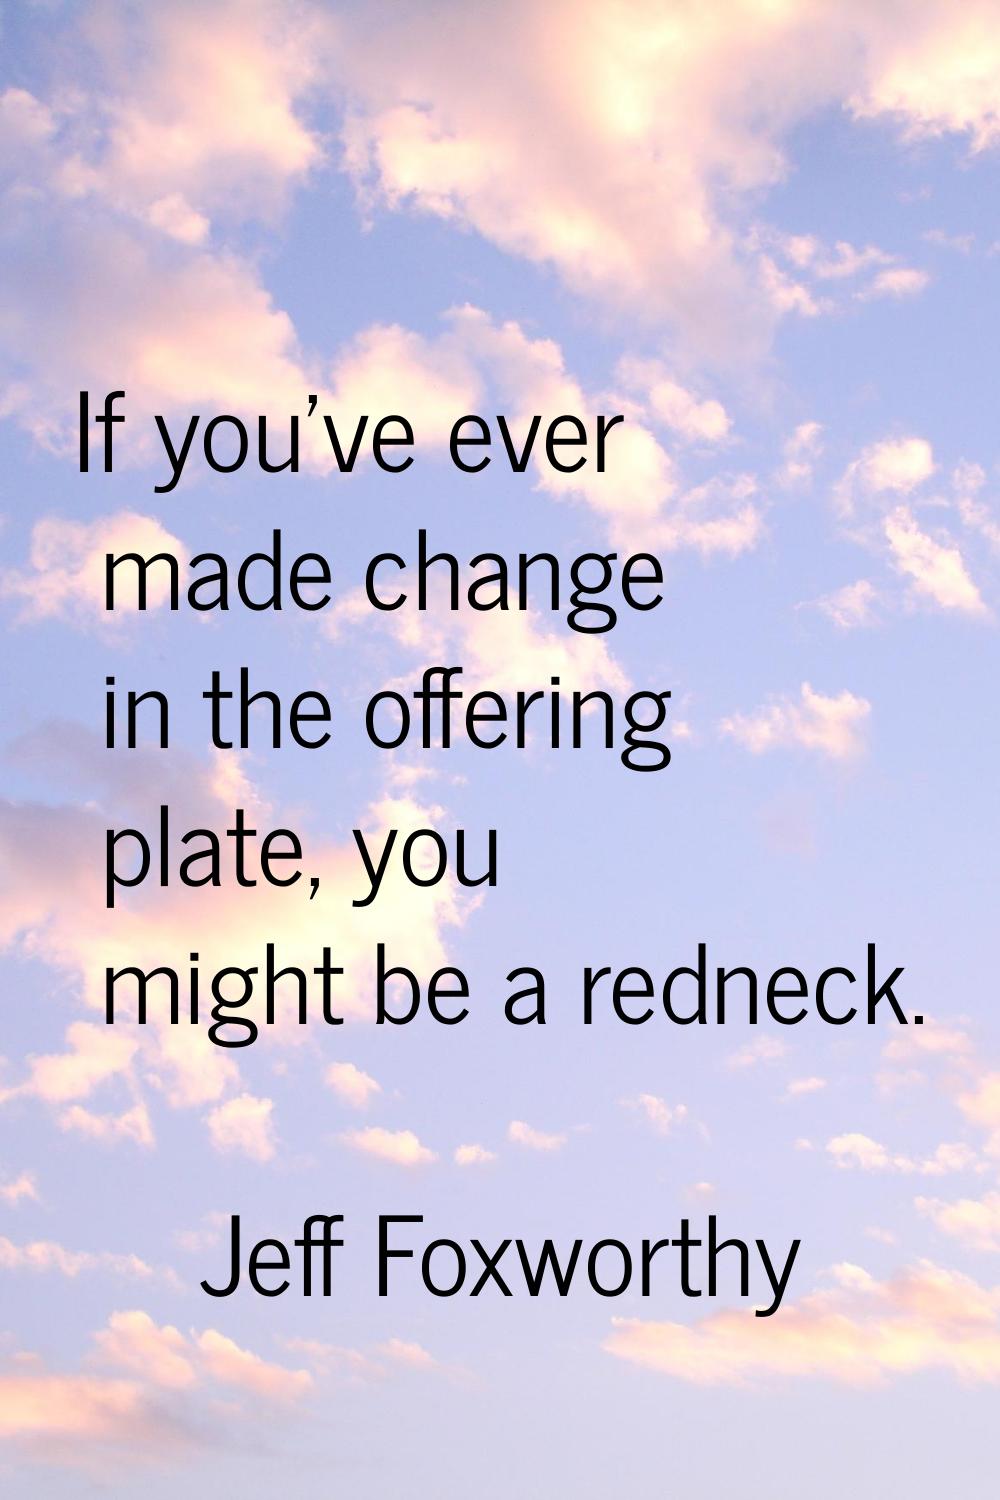 If you've ever made change in the offering plate, you might be a redneck.